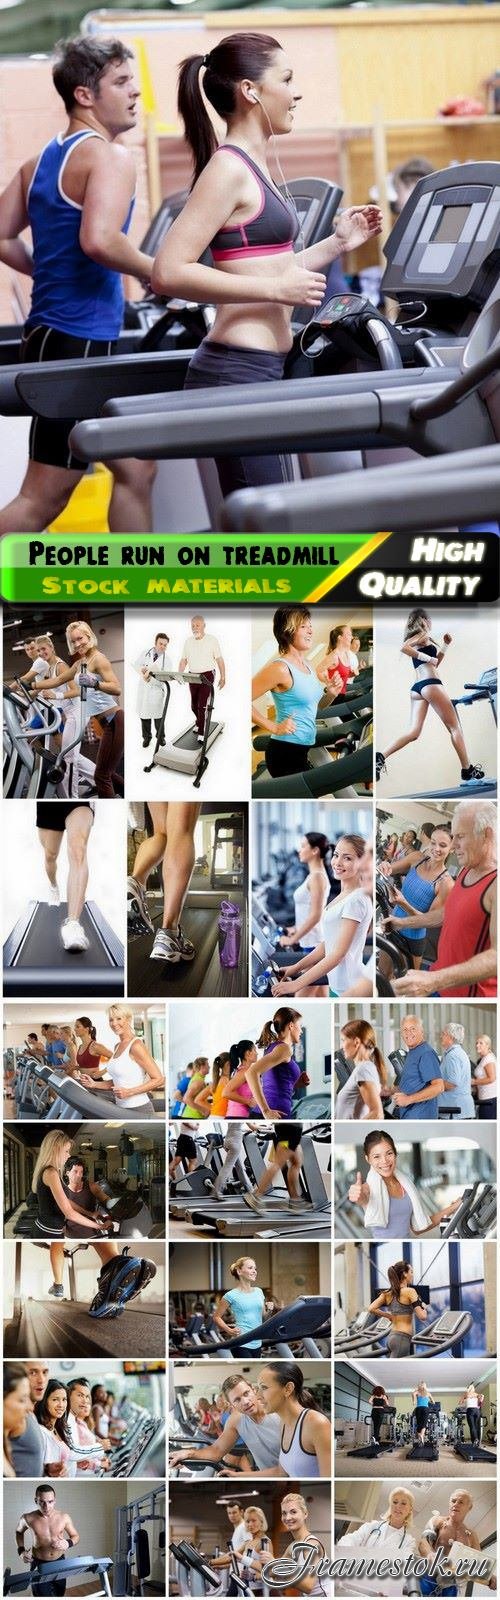 Sports people at the gym run on treadmill healthy lifestyle - 25 HQ Jpg